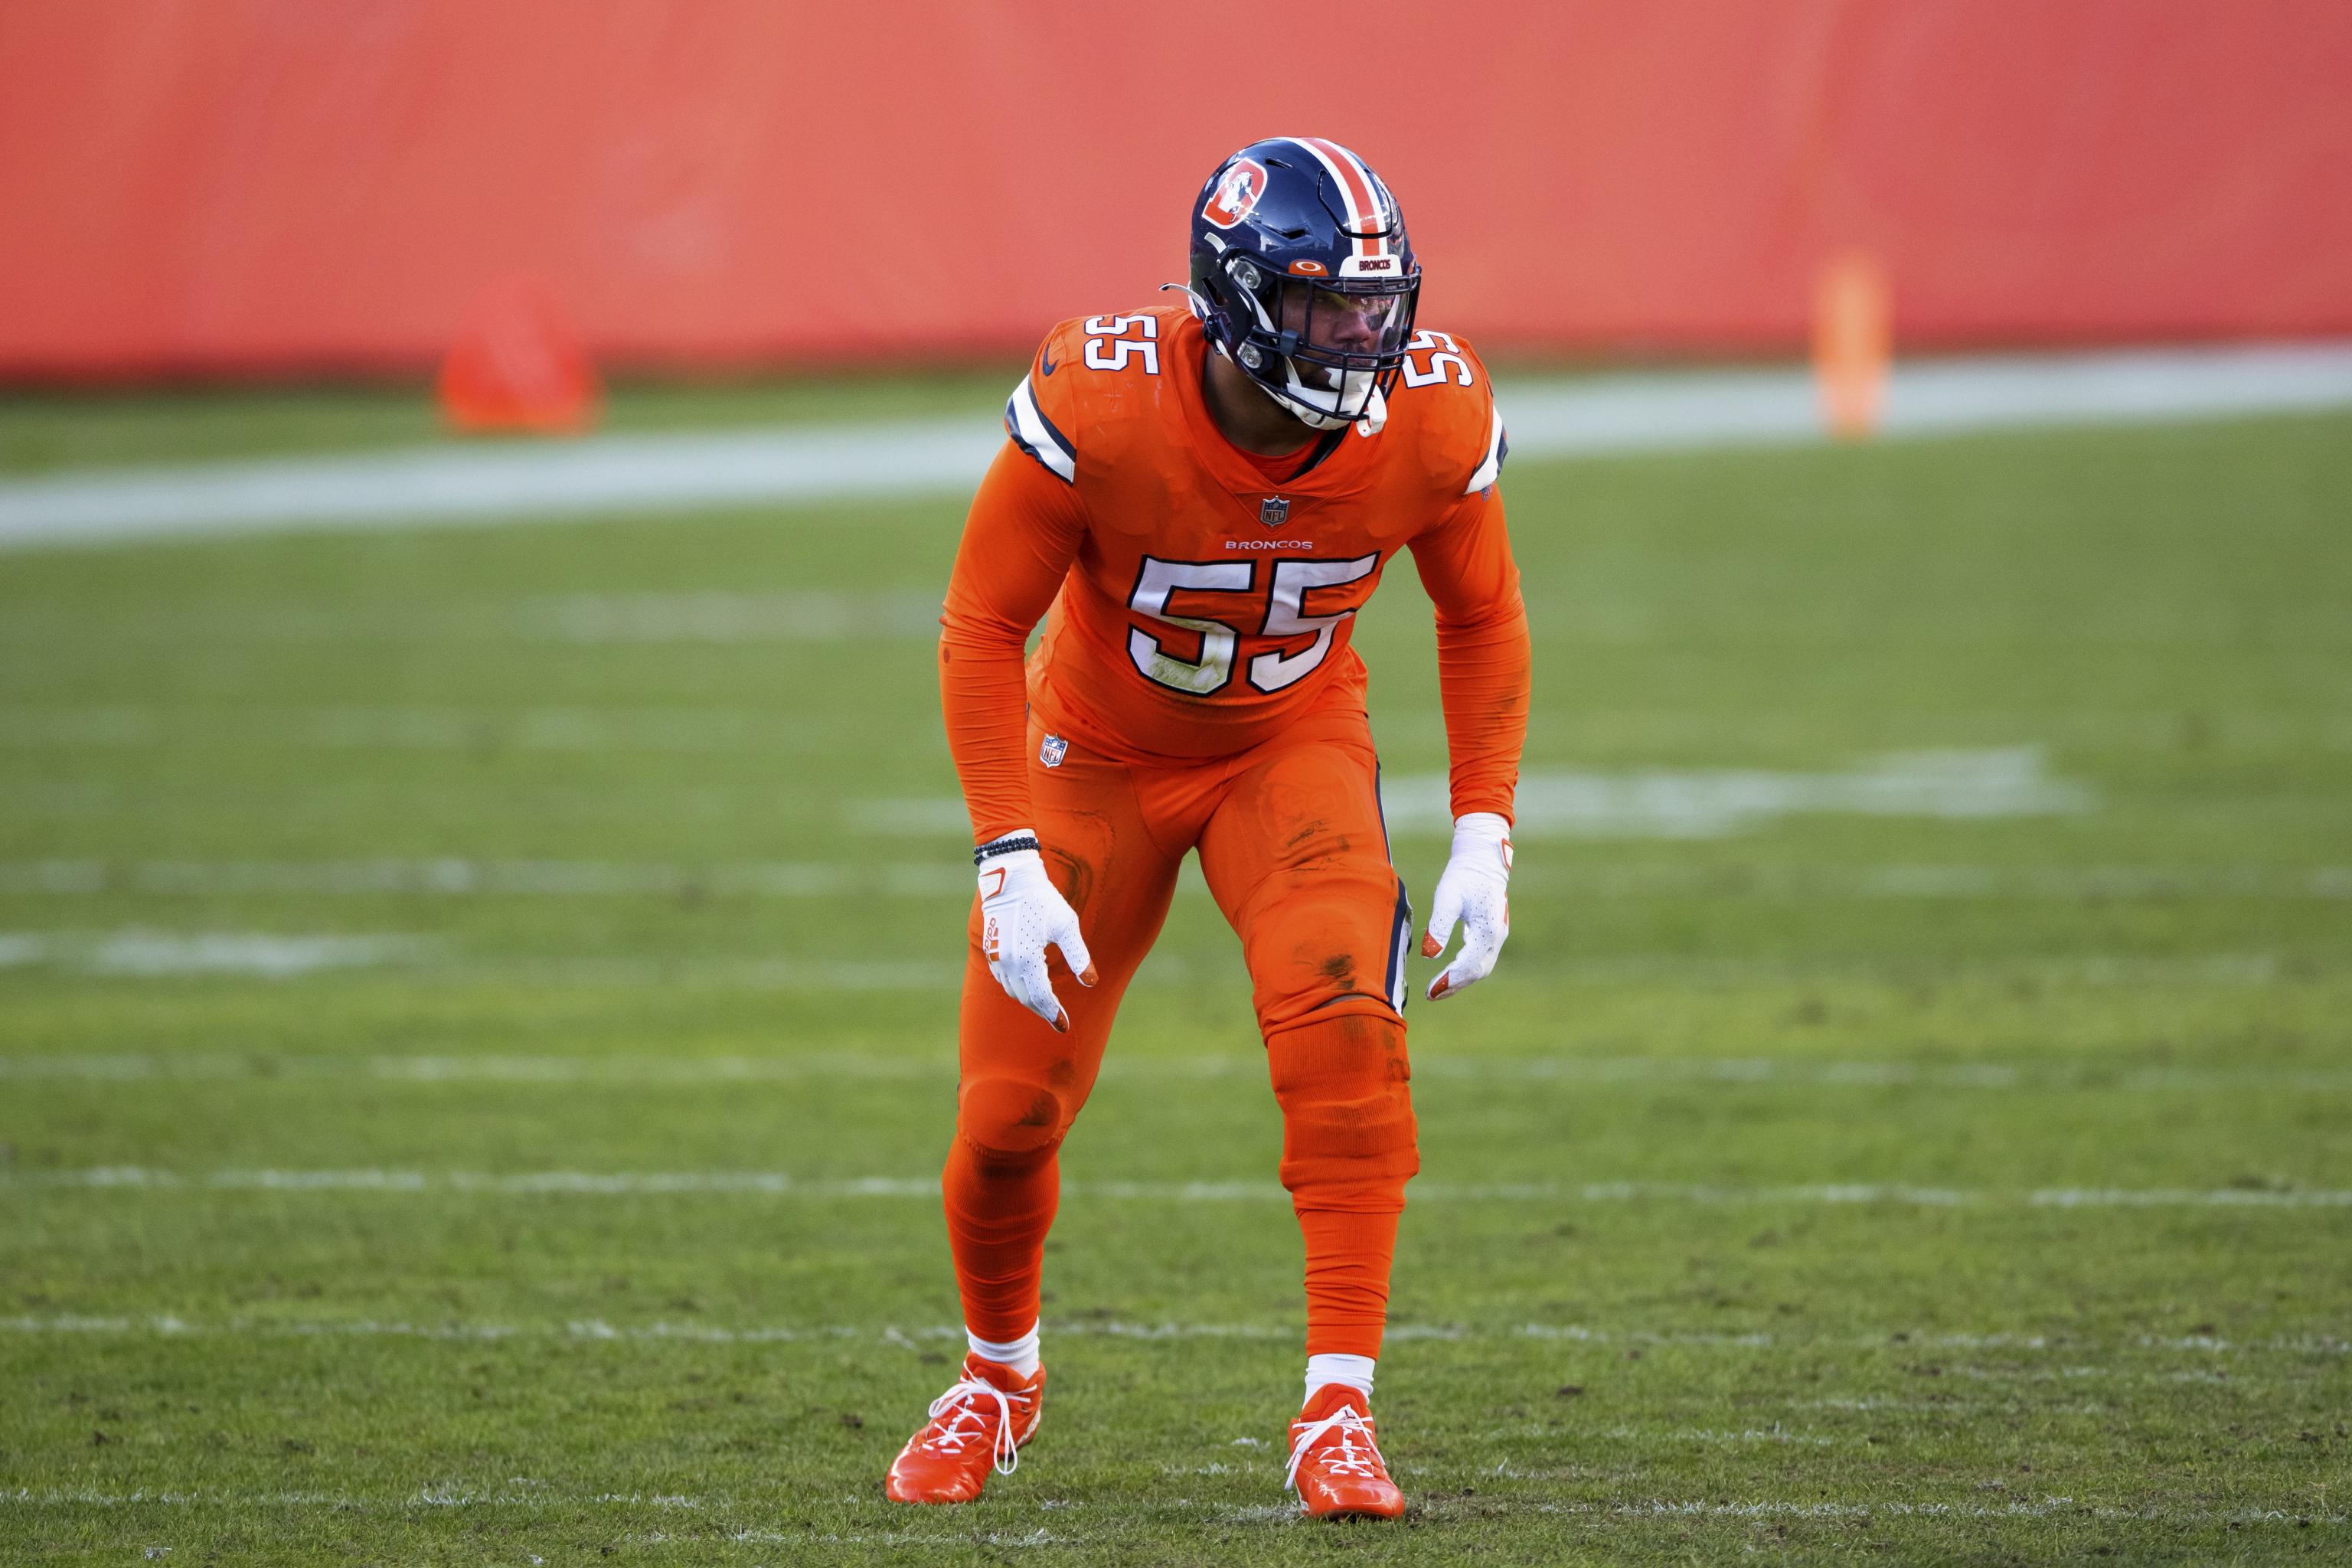 Broncos linebacker Bradley Chubb out with injured ankle